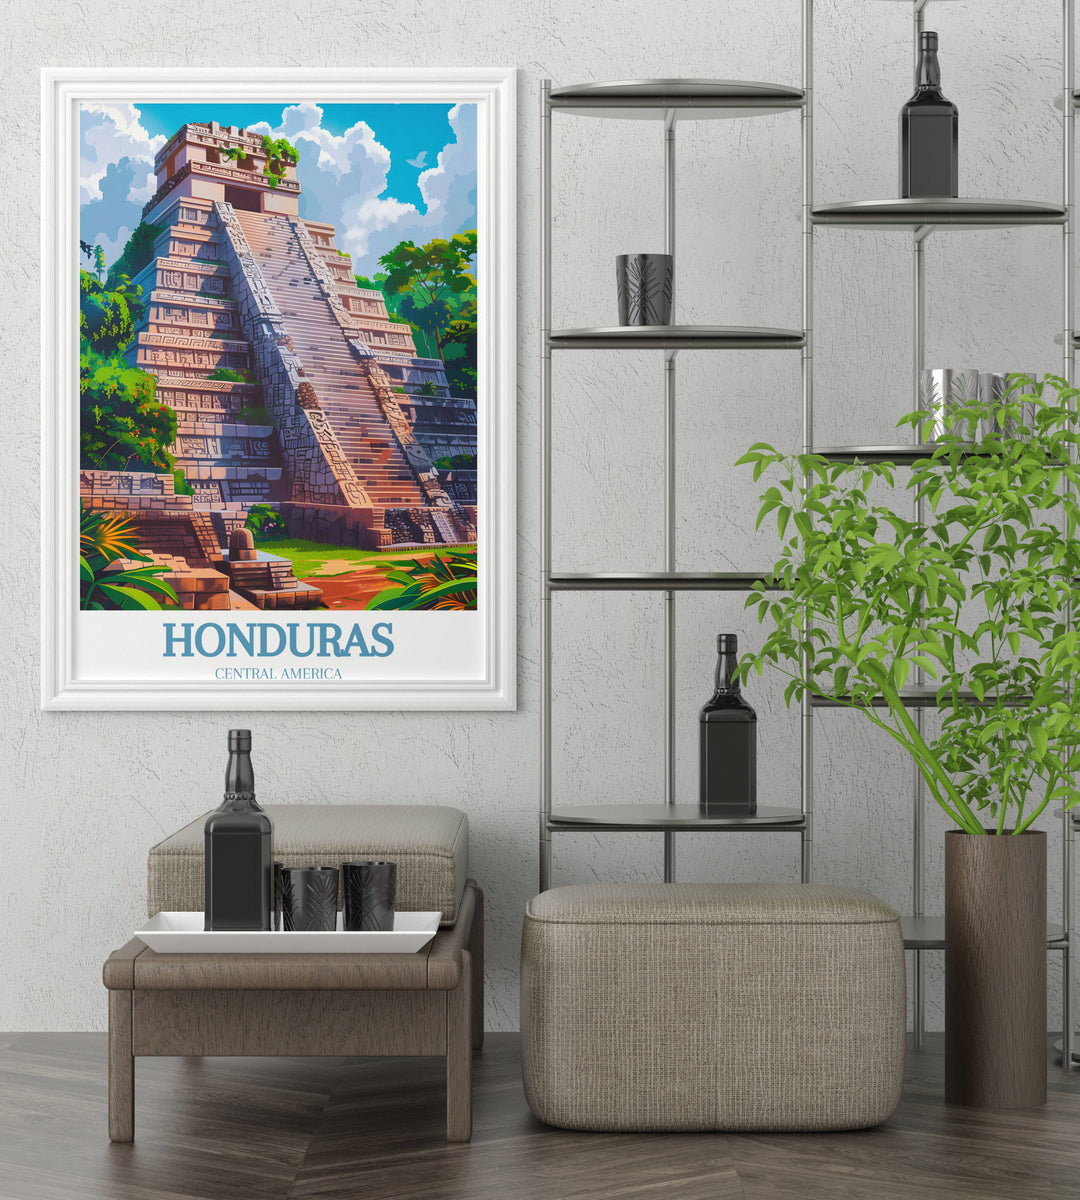 A dynamic Honduras travel poster highlighting the rich wildlife and dense rainforests of Central America.